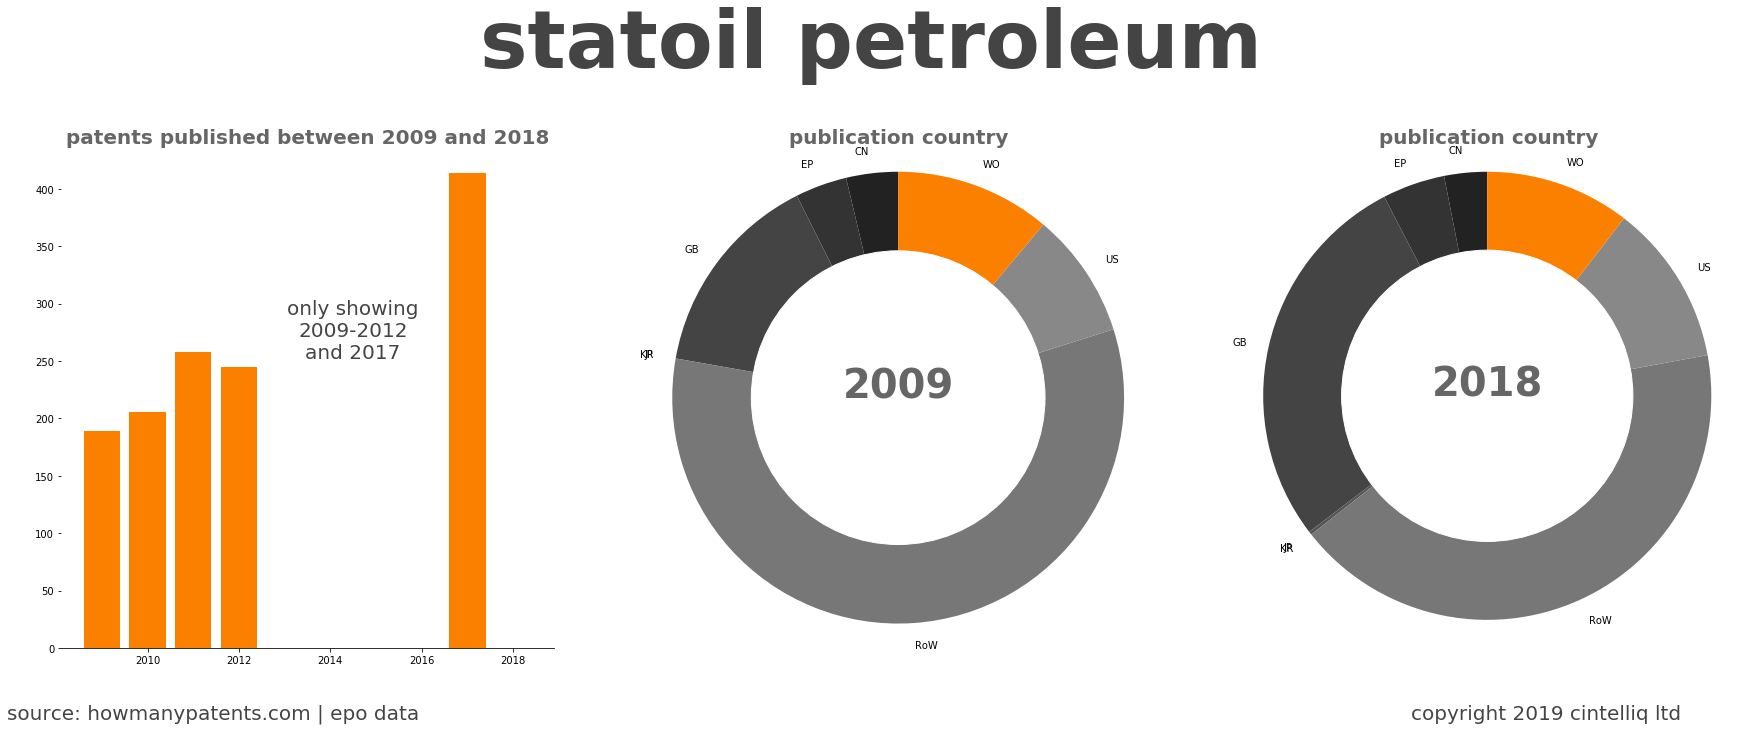 summary of patents for Statoil Petroleum